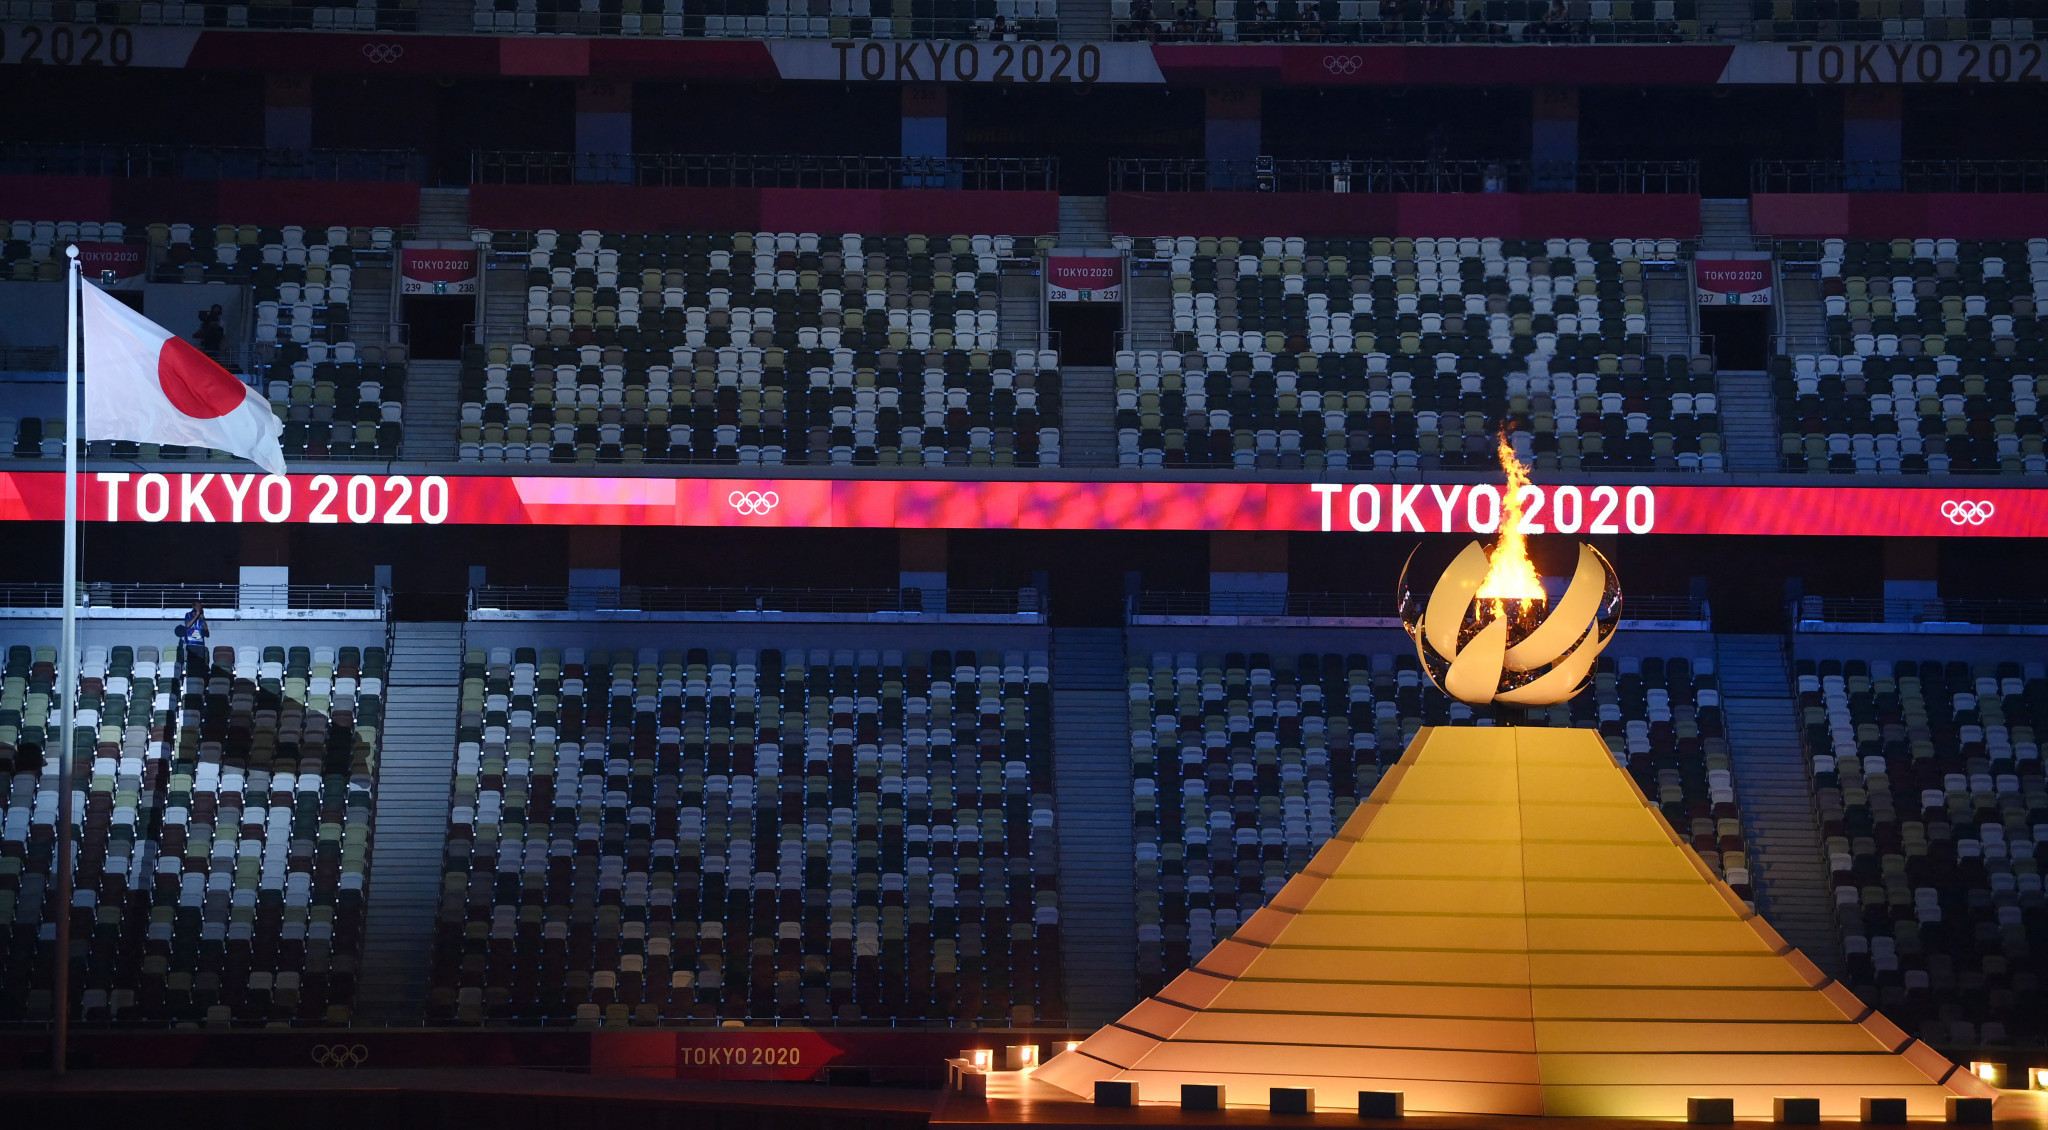 A fresh warrant has been served in connection with a bribery investigation into the awarding of sponsorships at Tokyo 2020 ©Getty Images